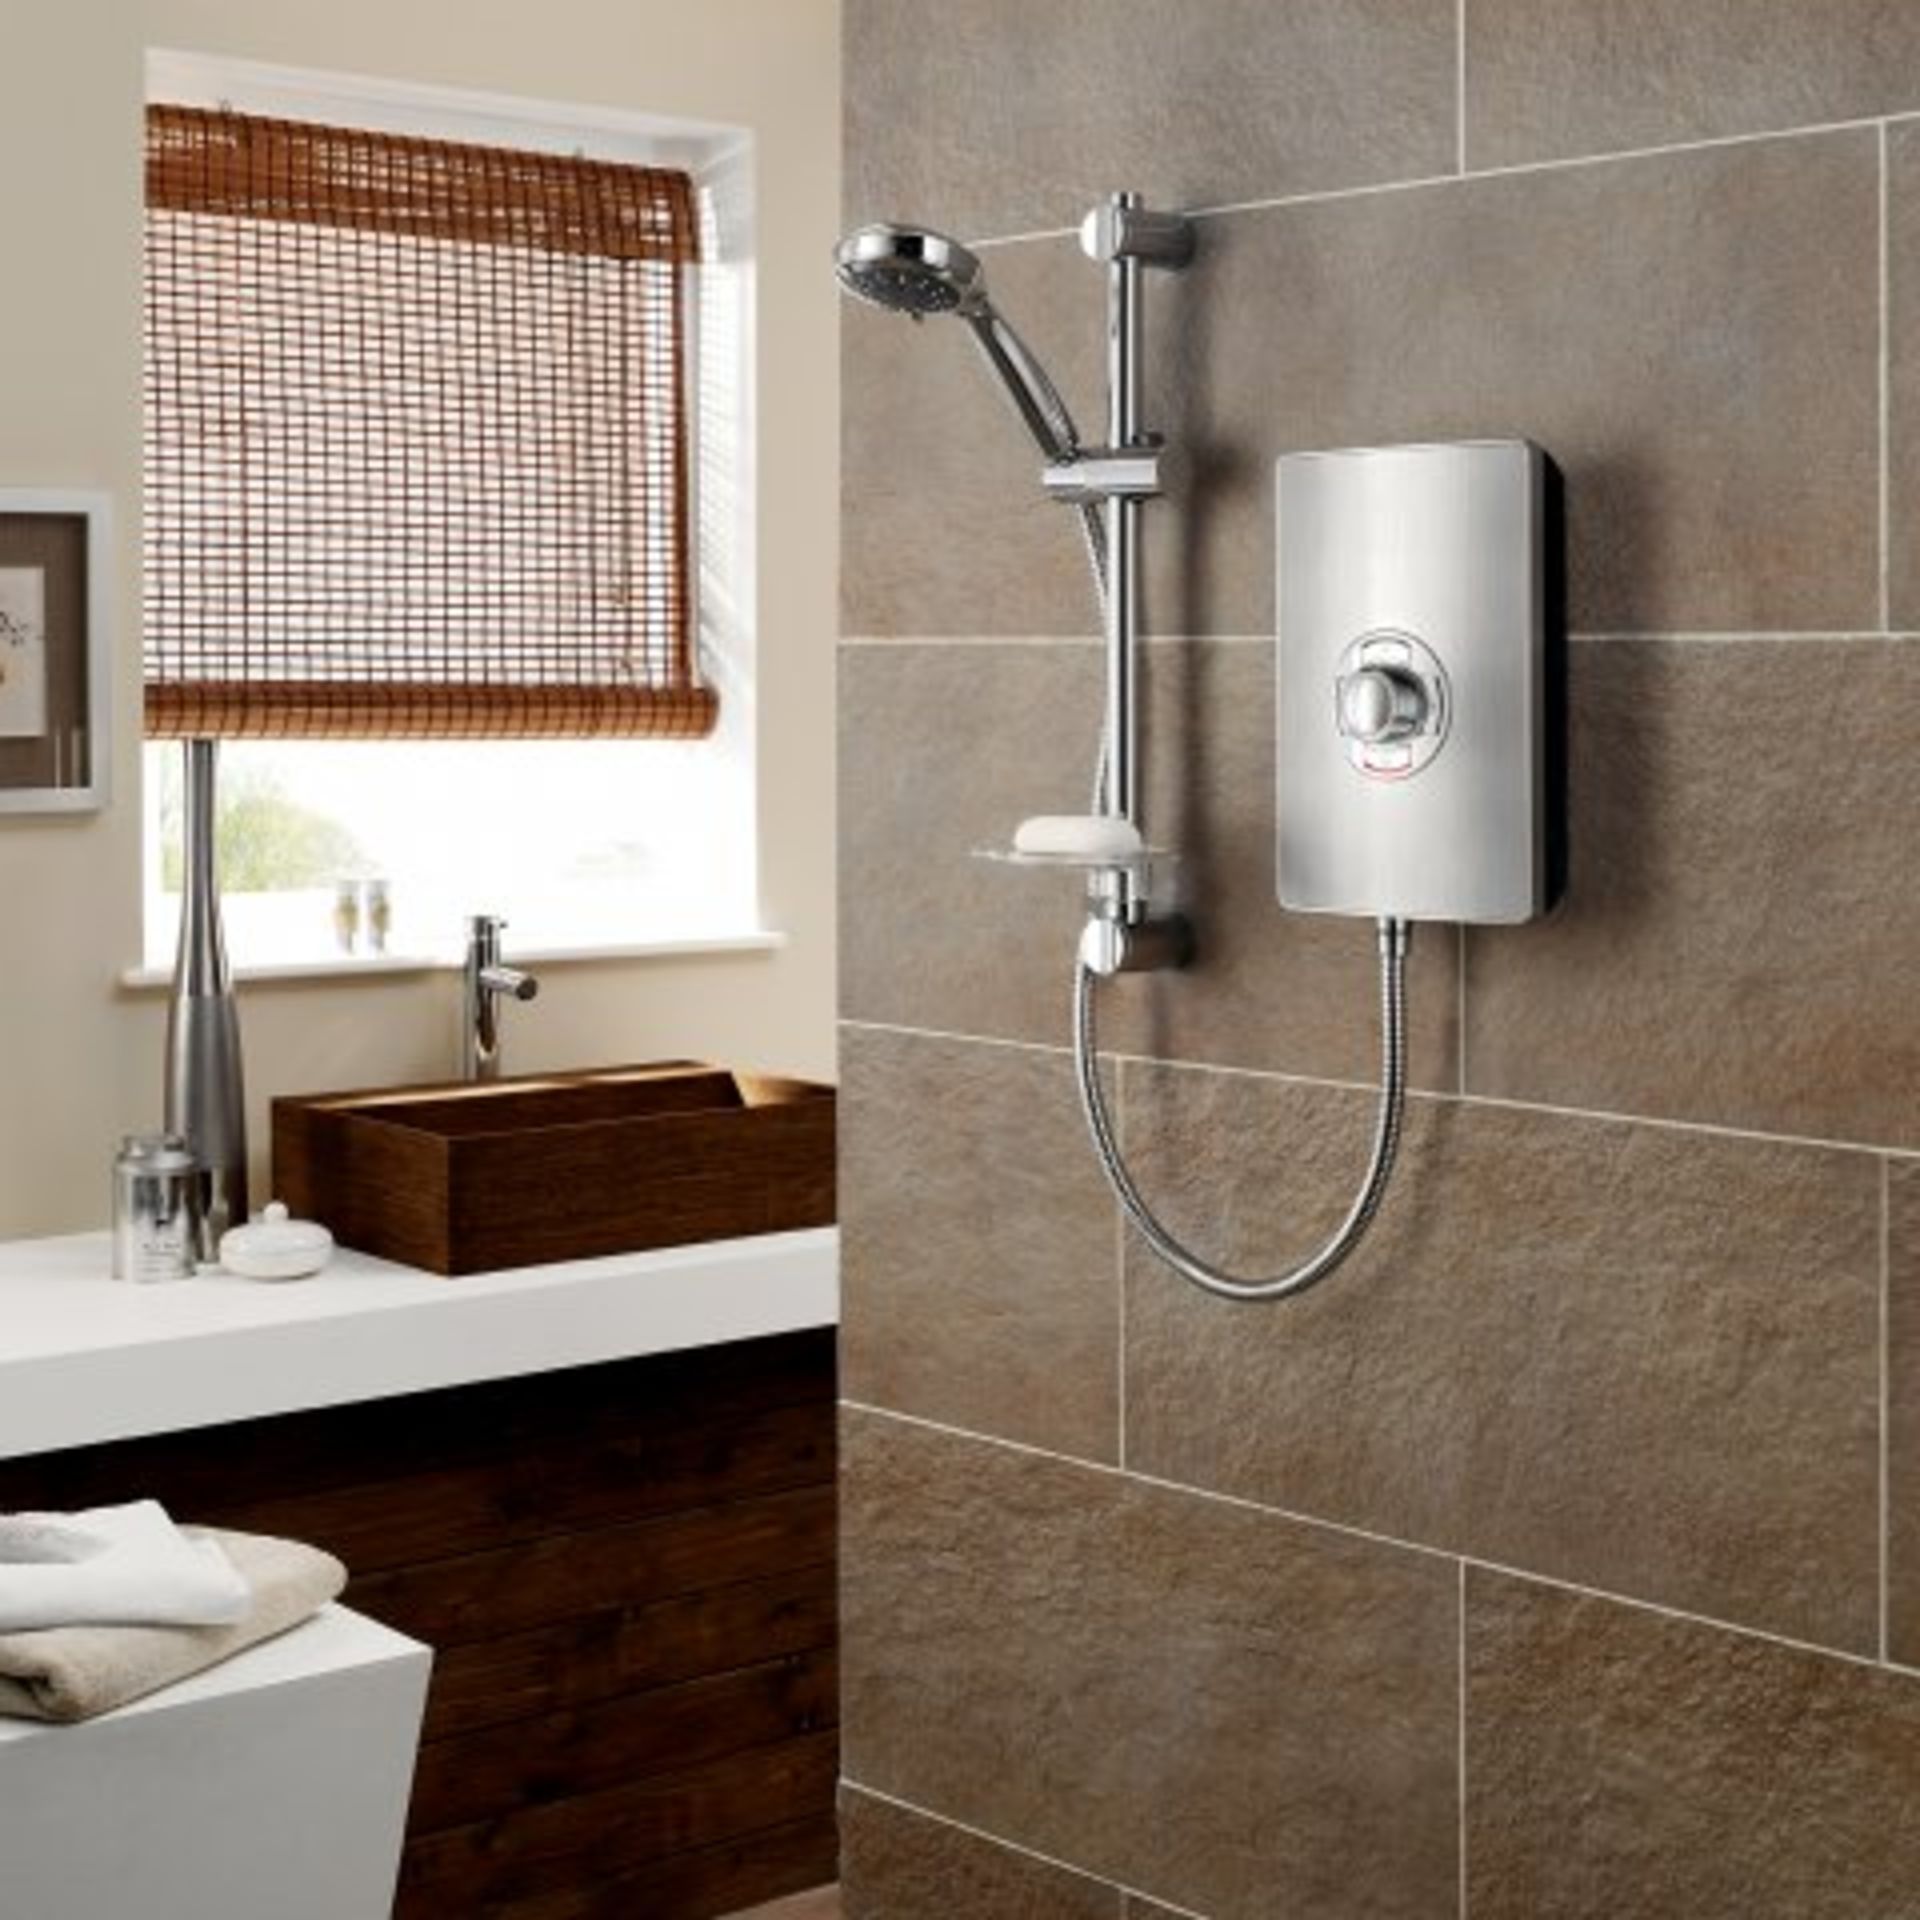 (M25) Triton Aspirante Brushed Steel Electric Shower 8.5kW. RRP £349.99. These sleek electric - Image 3 of 4